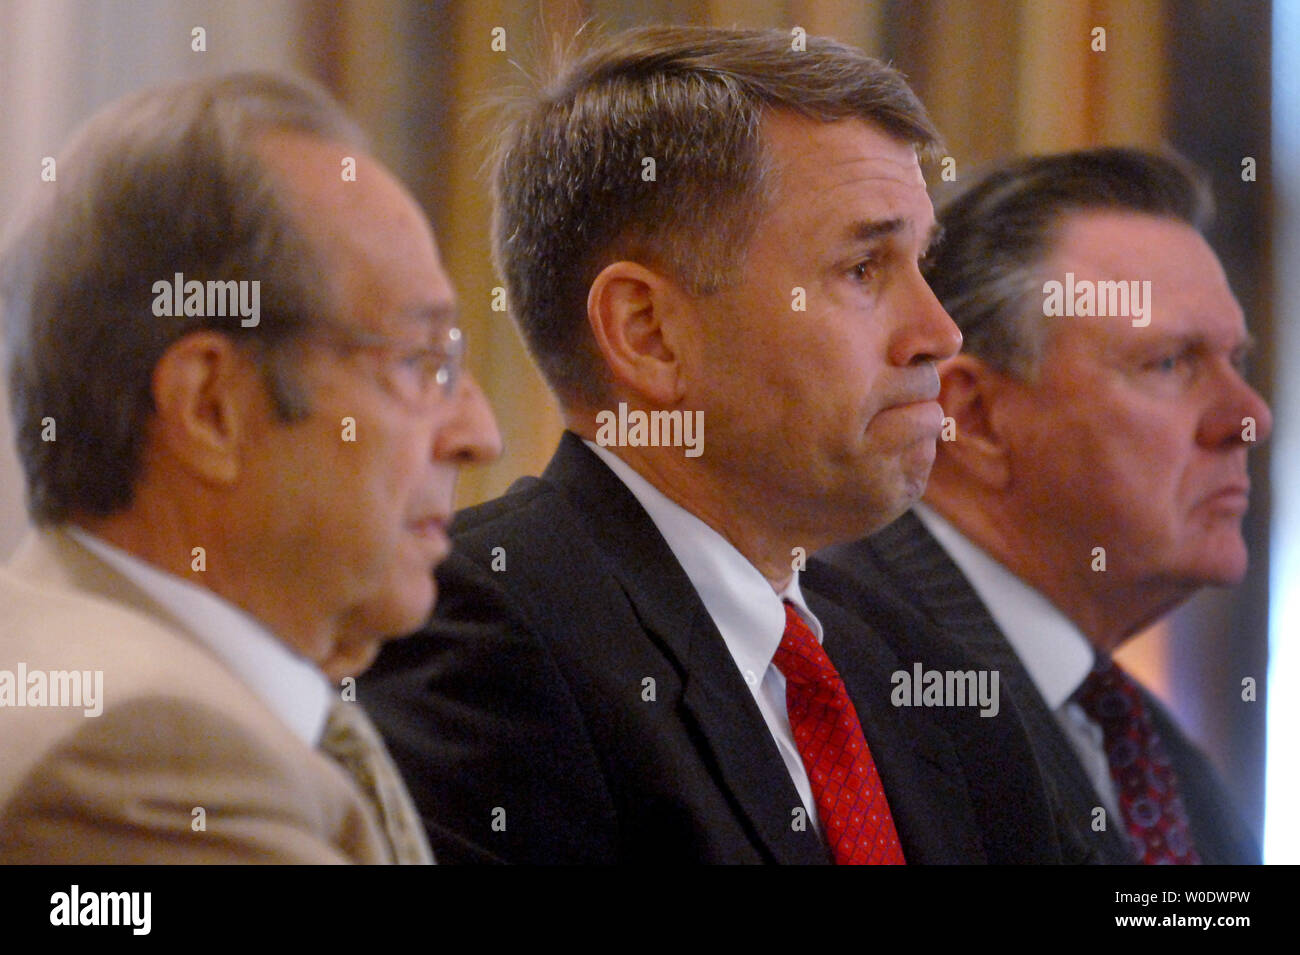 Retired Army Major John Batise (C), former U.S. Secretary of Defense William J. Perry (L) and Retired Army Gen. John Keane (L) testify before a House Armed Services and Foreign Affairs joint Committee hearing entitled 'Whats Next for Iraq' in Washington on September 6, 2007. (UPI Photo/Kevin Dietsch) Stock Photo